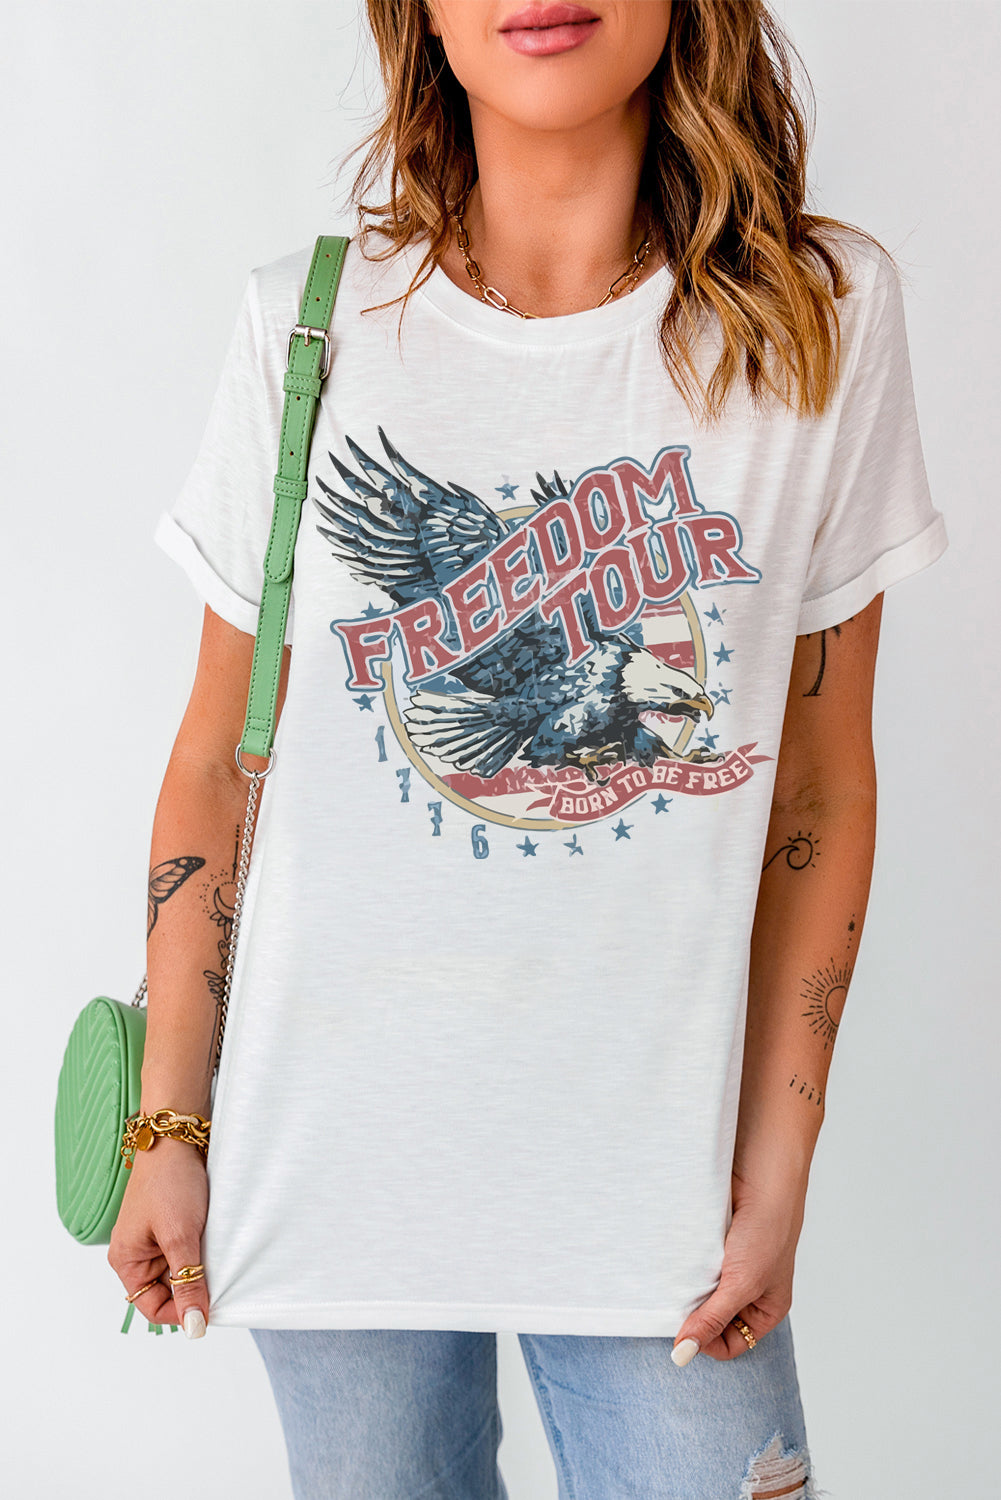 Freedom Tour Graphic T-Shirt - Wildly Max